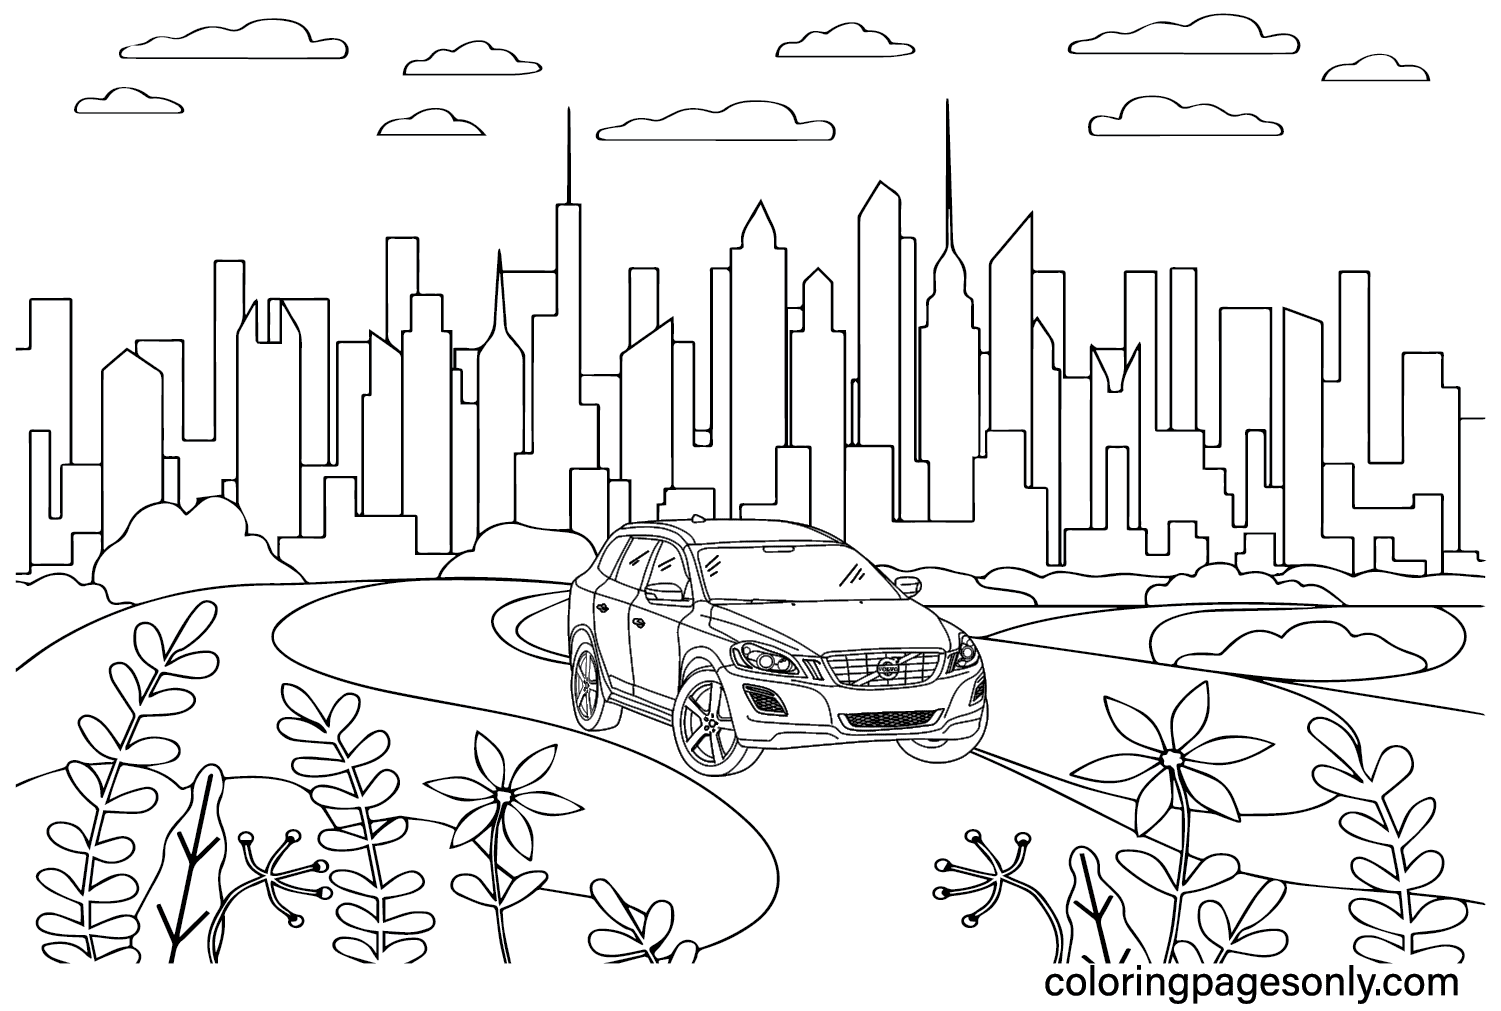 Volvo XC60 Coloring Page - Free Printable Coloring Pages